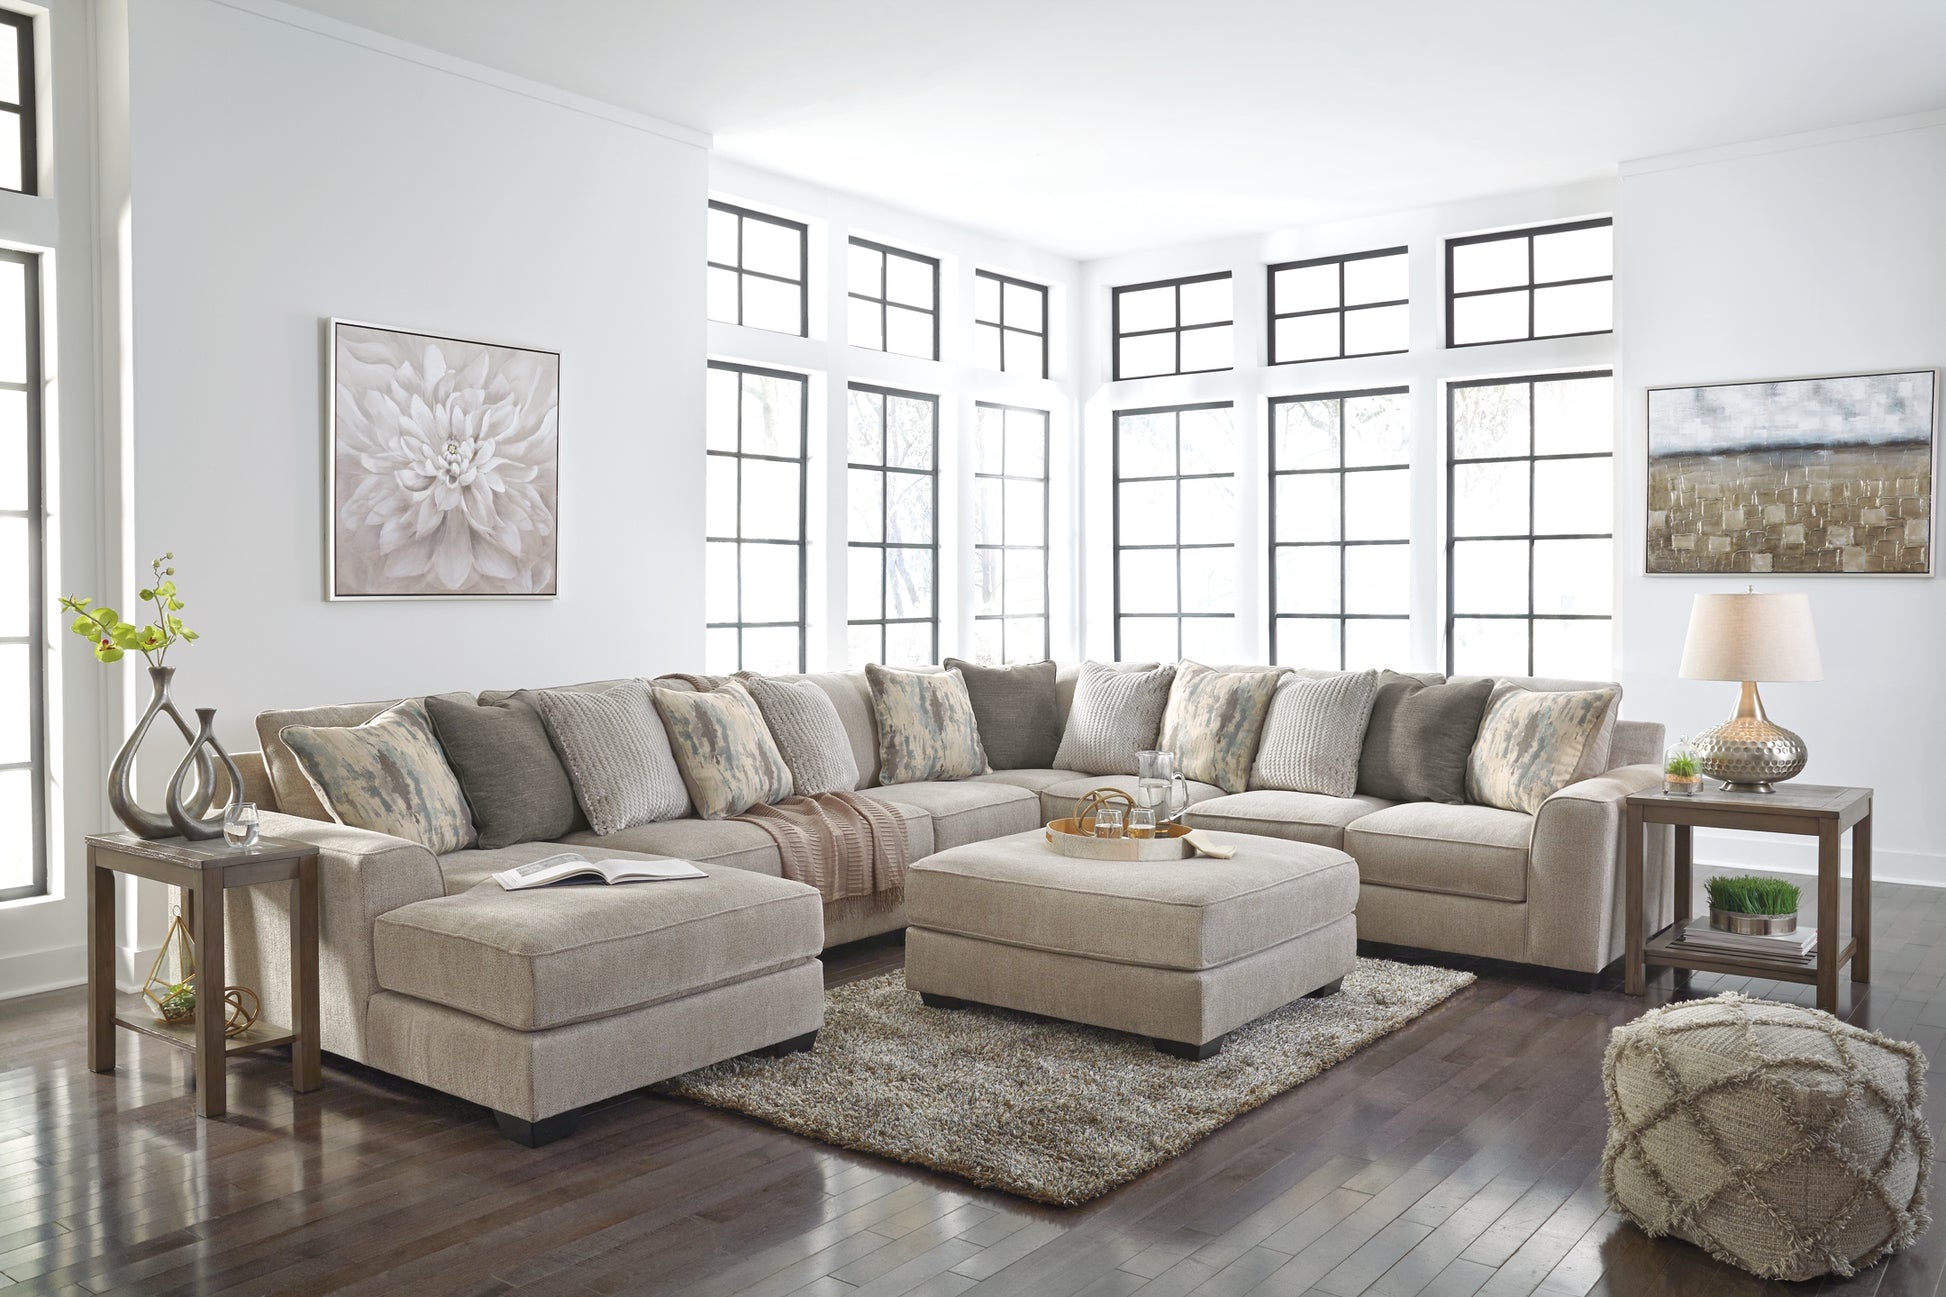 Ardsley 5-Piece Sectional with Chaise Wilson Furniture (OH)  in Bridgeport, Ohio. Serving Bridgeport, Yorkville, Bellaire, & Avondale